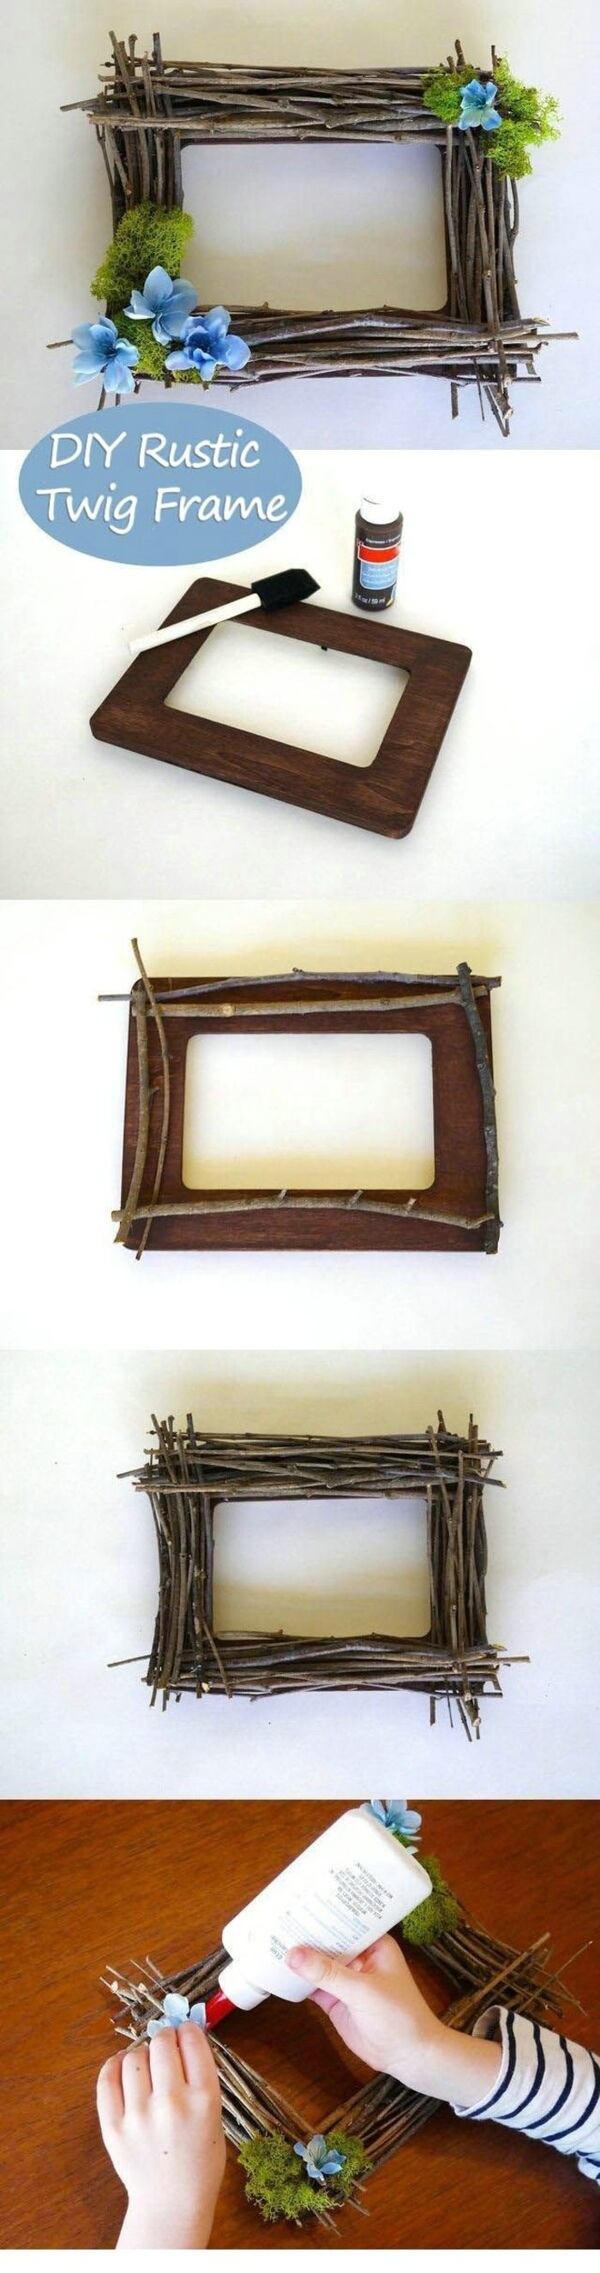 15 Easy DIY Photo Frame Ideas That Are Super Fun To Craft